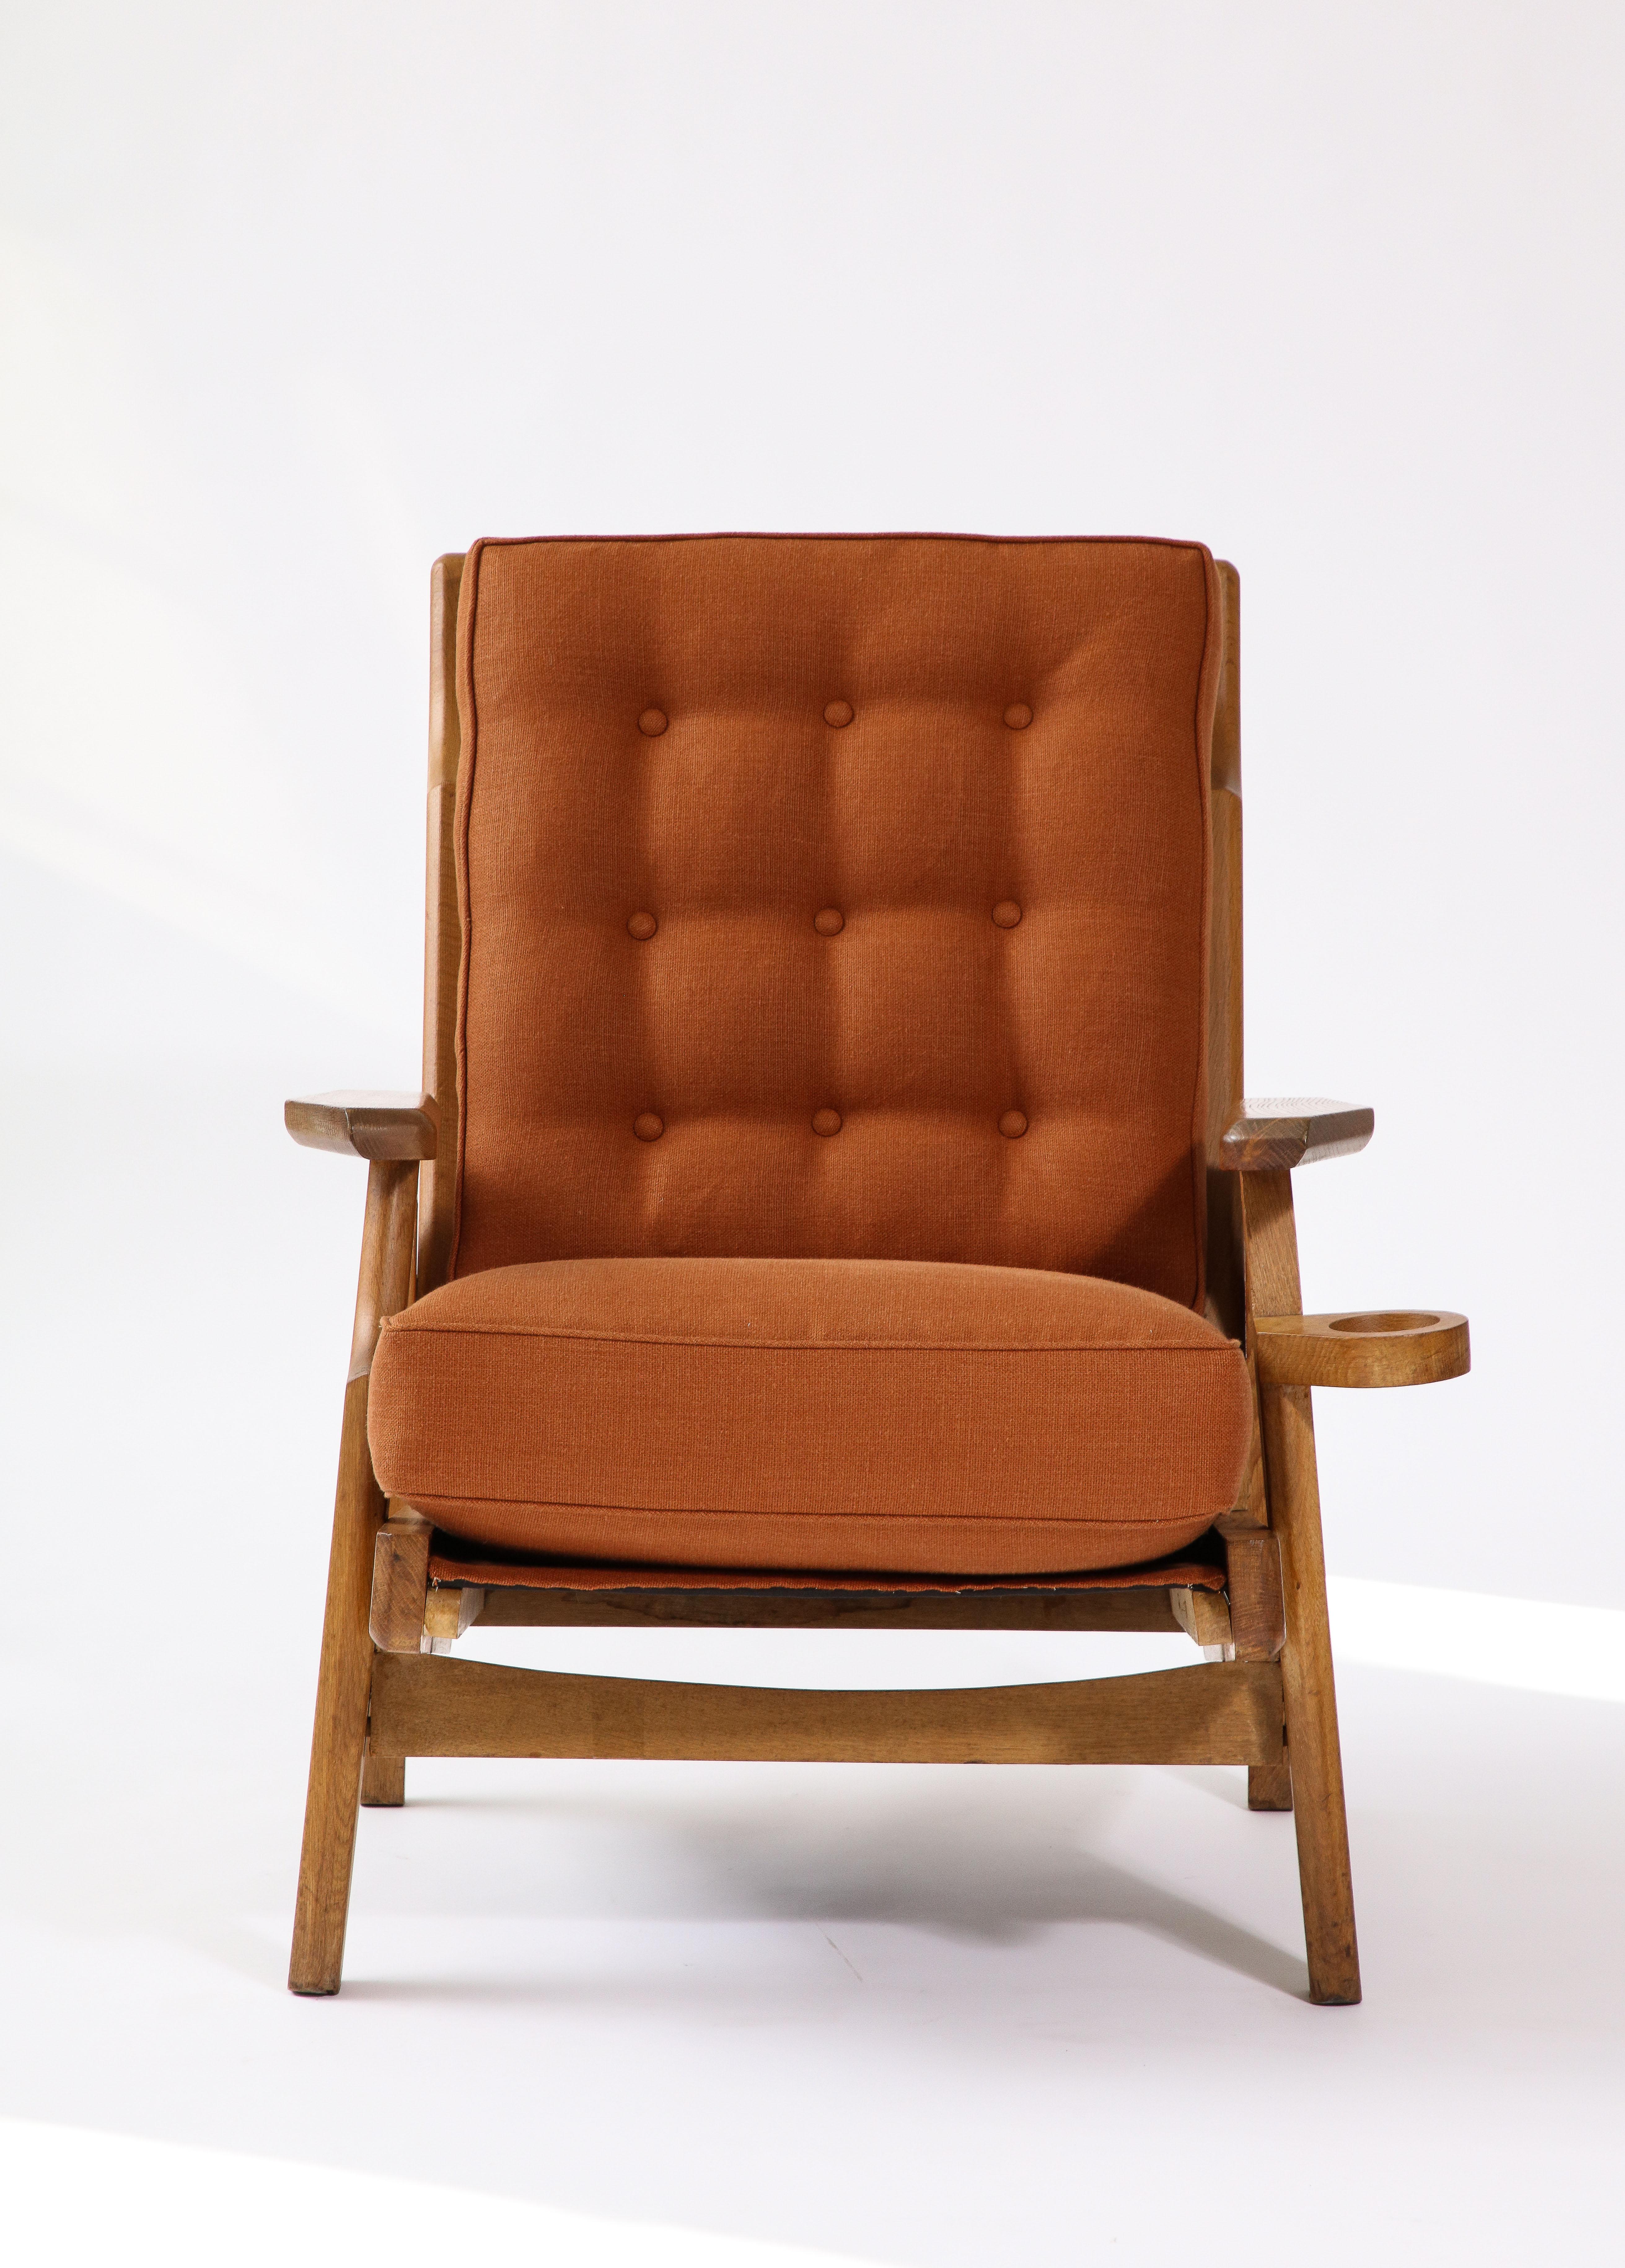 Priced individually; two available.

Cool, angular armchair by Guillerme et Chambron, with a stylish 